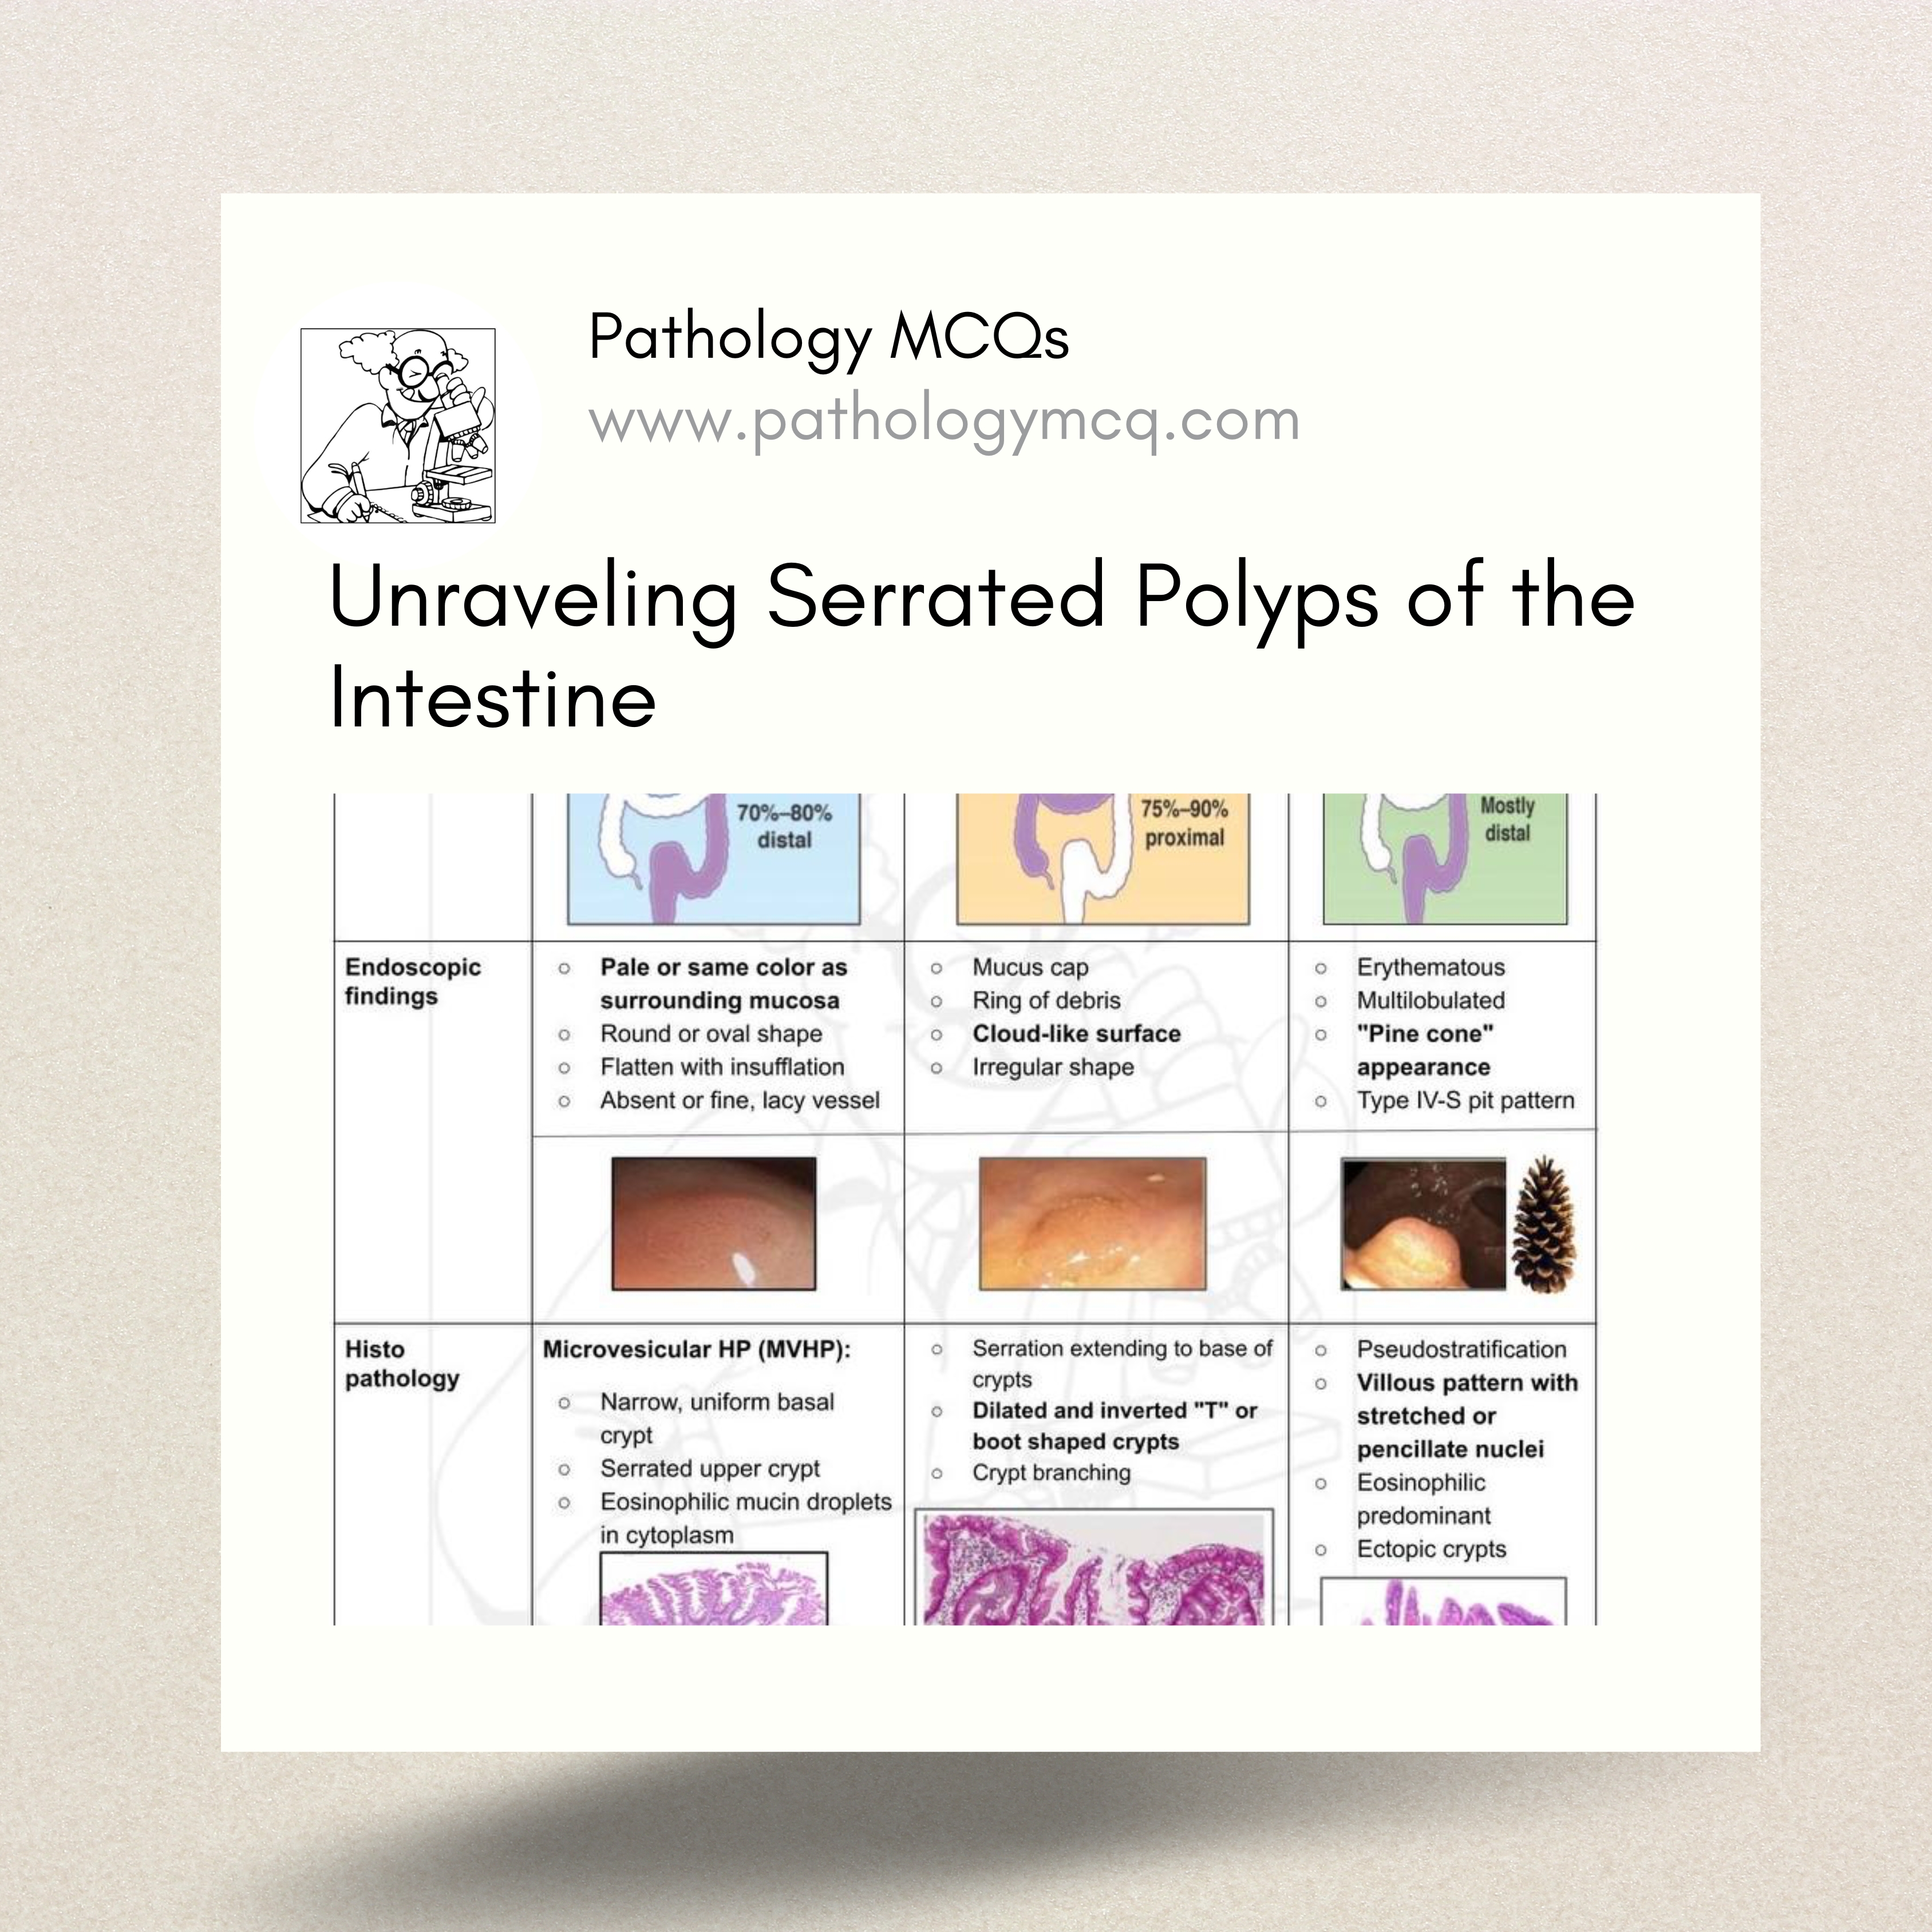 Unraveling Serrated Polyps of the Intestine: A Comprehensive Guide